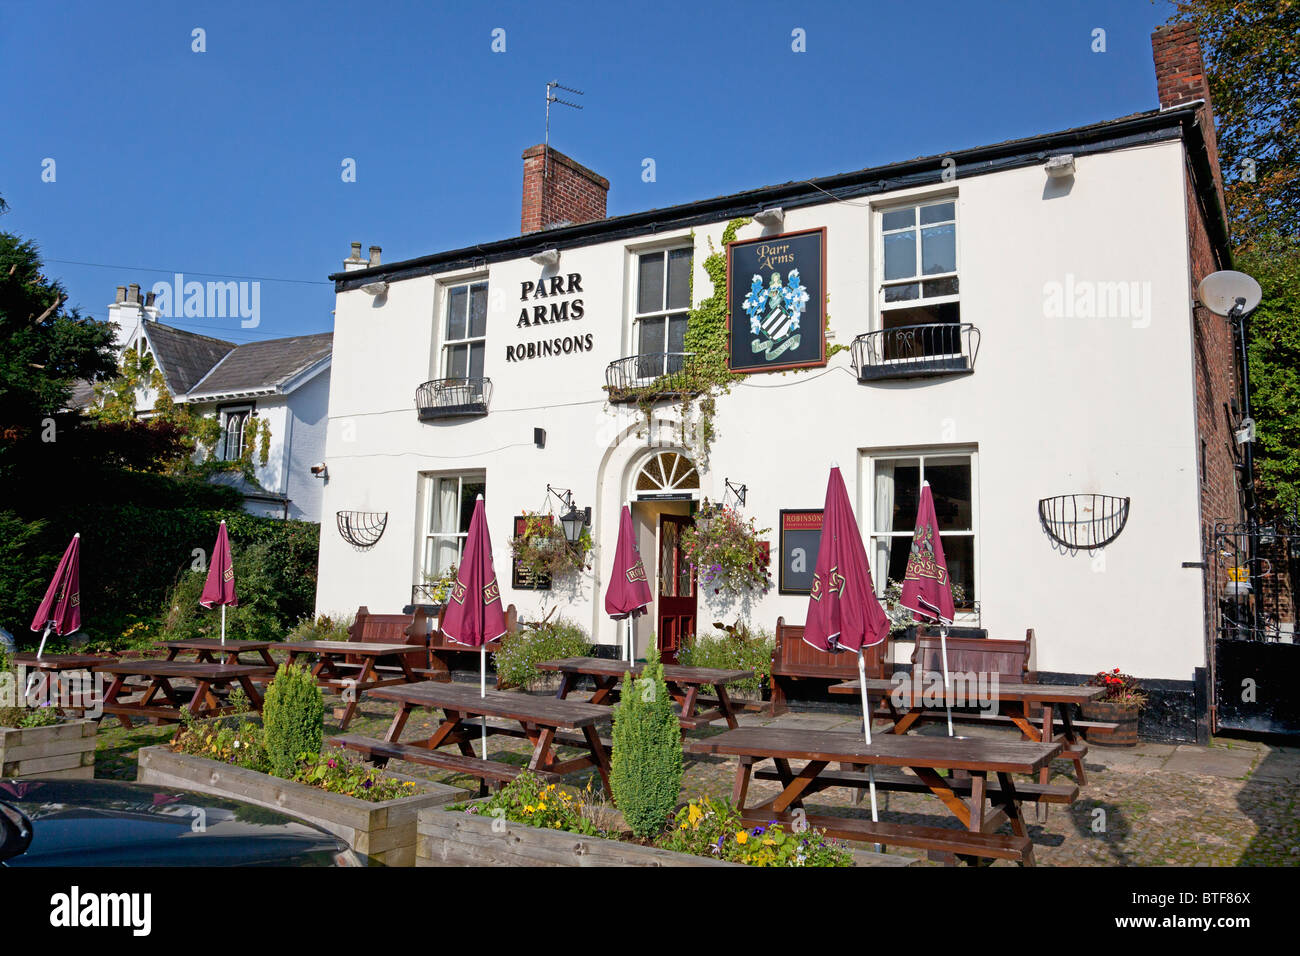 Die Parr Arms Pub in Grappenhall, Cheshire Stockfoto